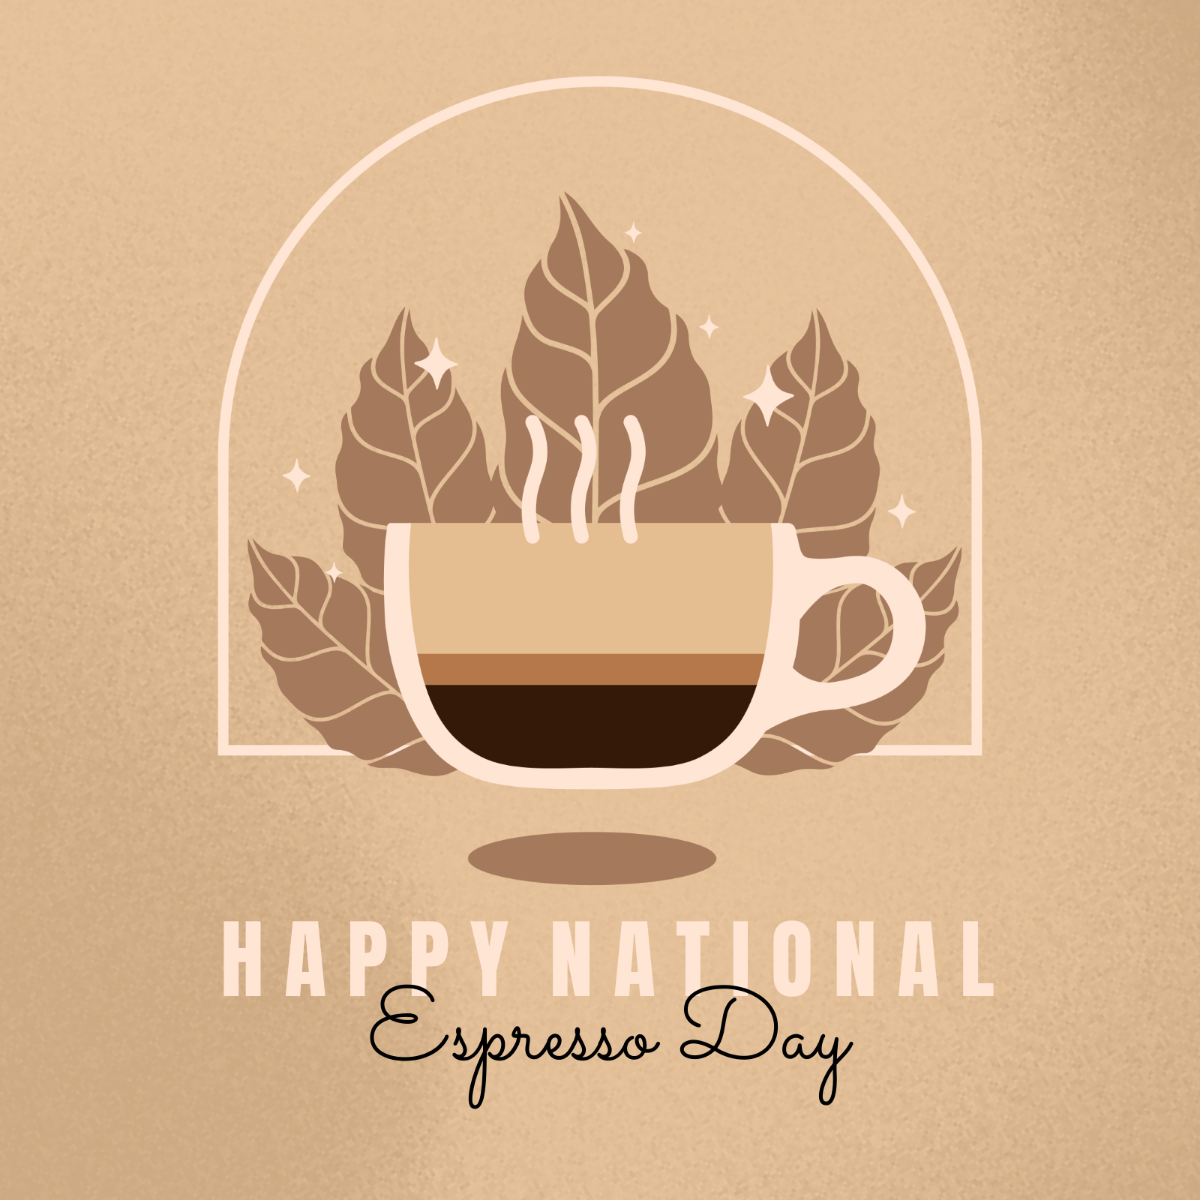 Free National Espresso Day WhatsApp Post Template